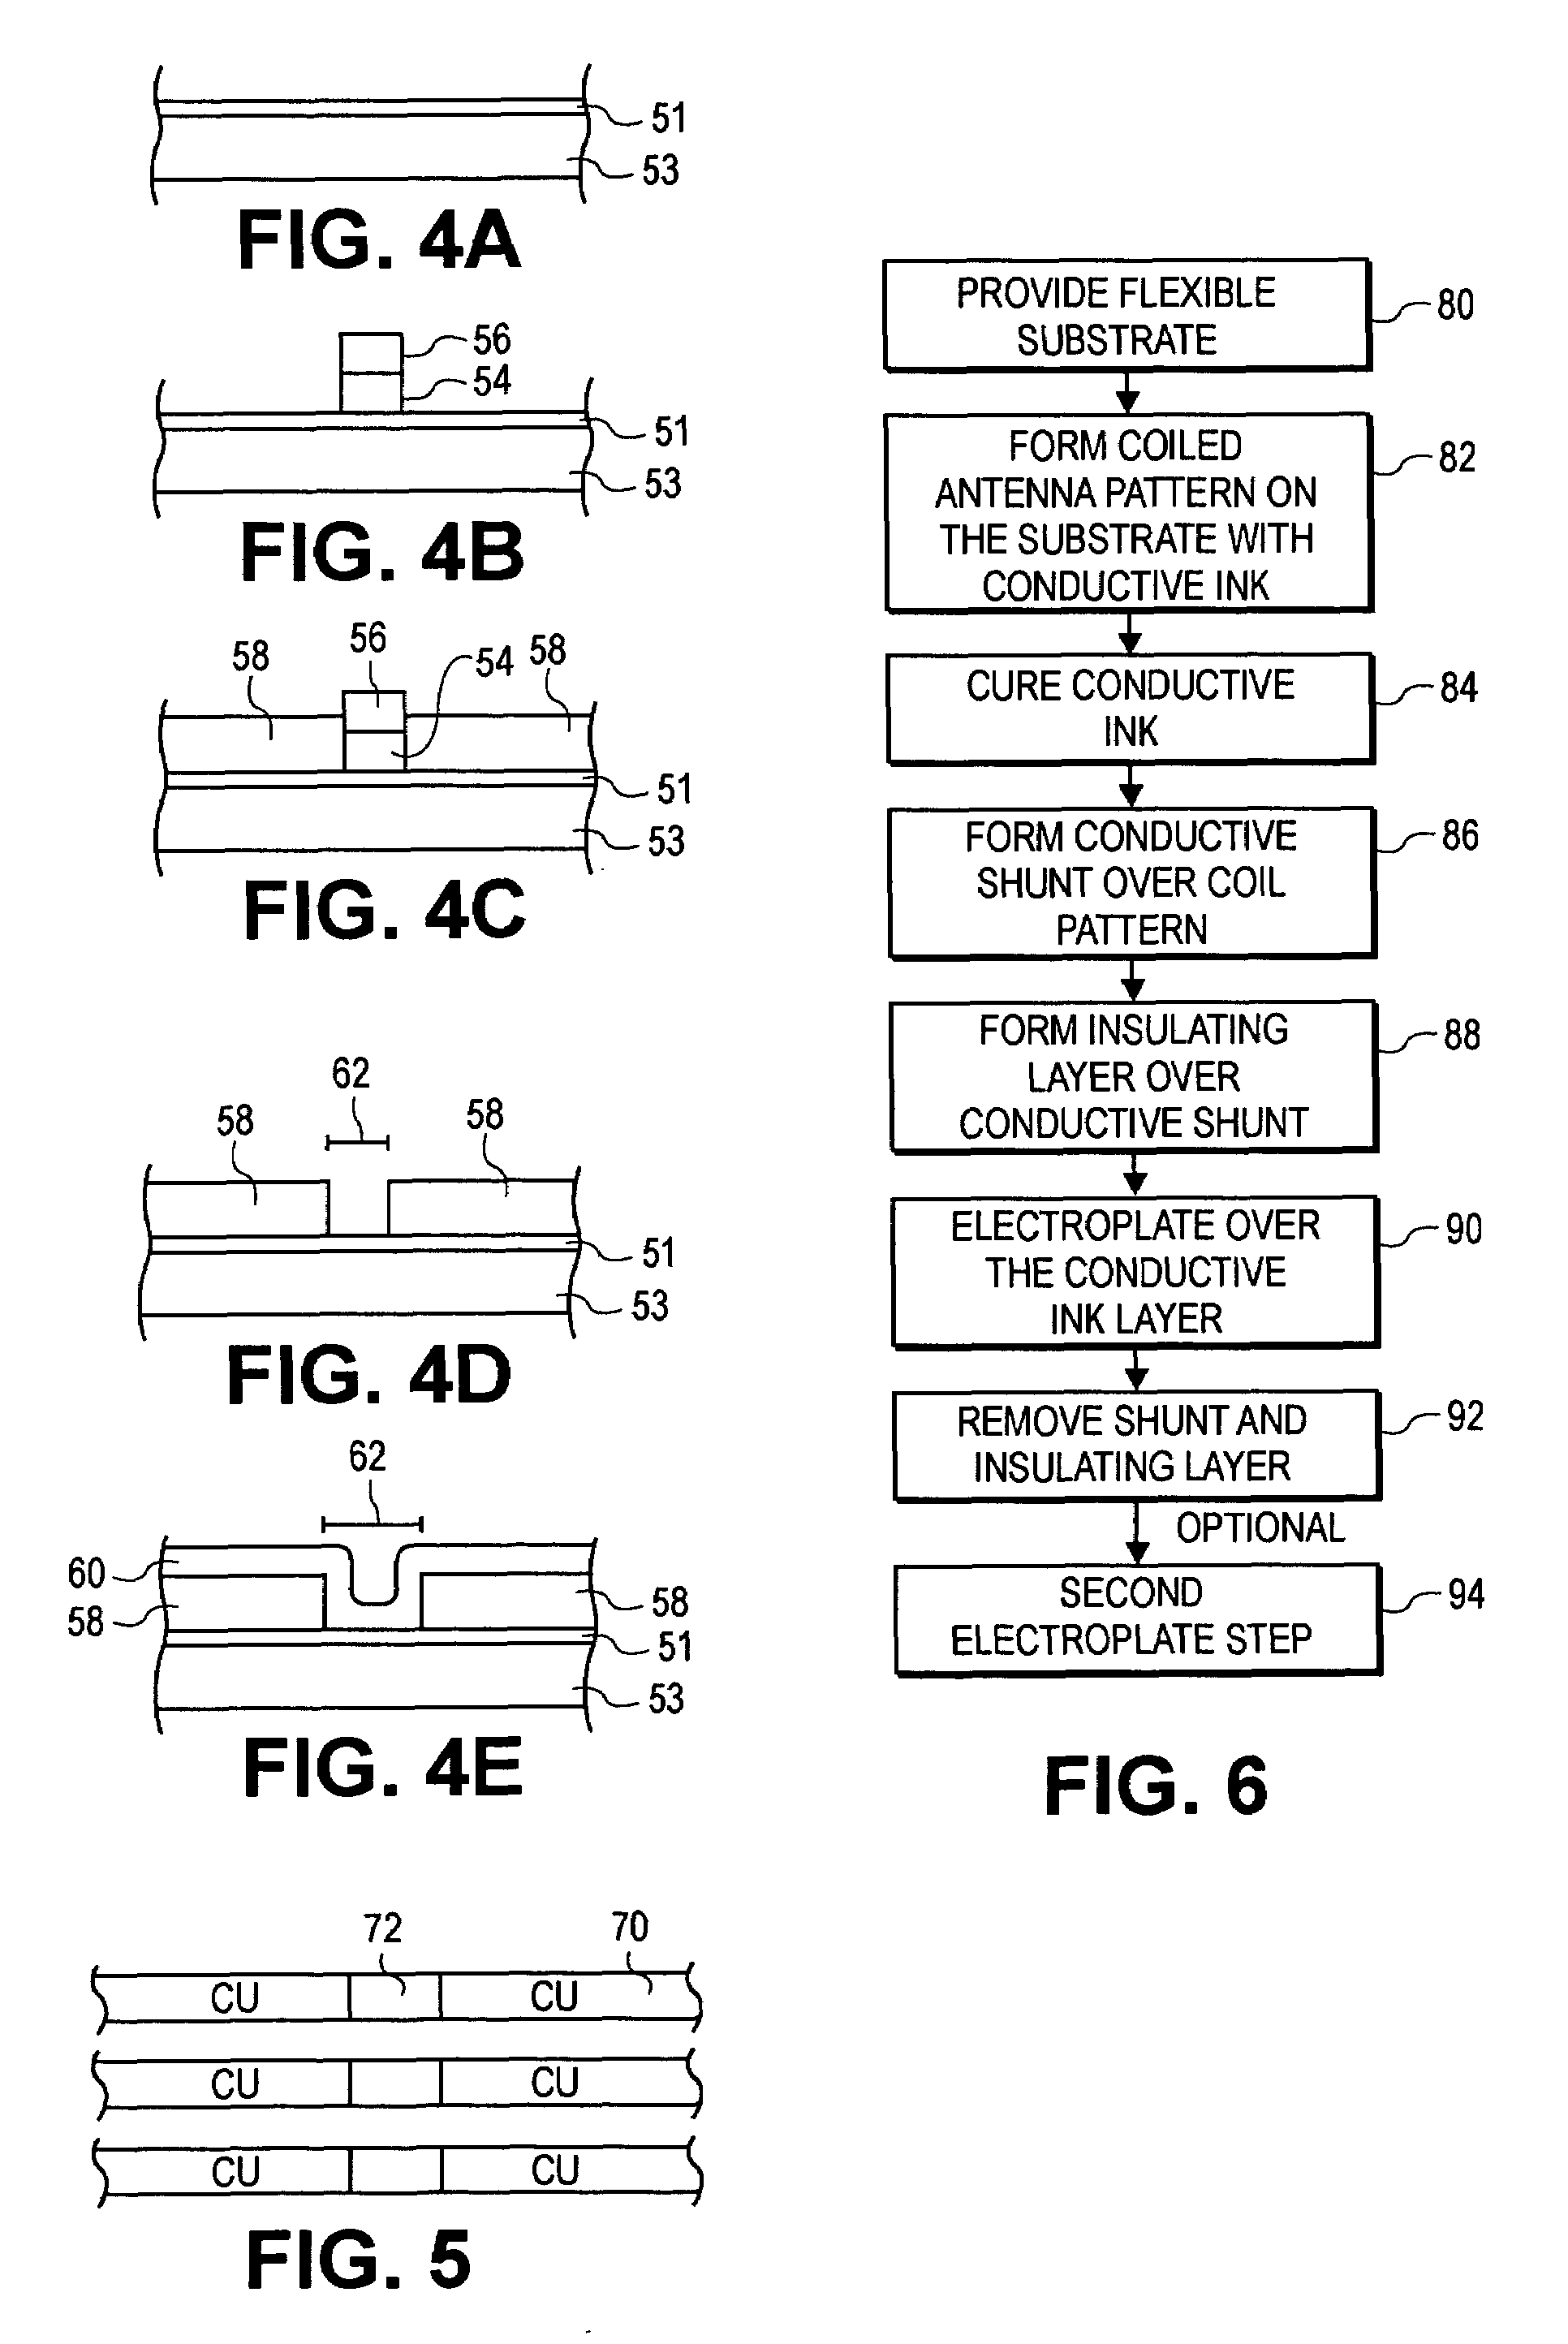 Method for forming radio frequency antenna